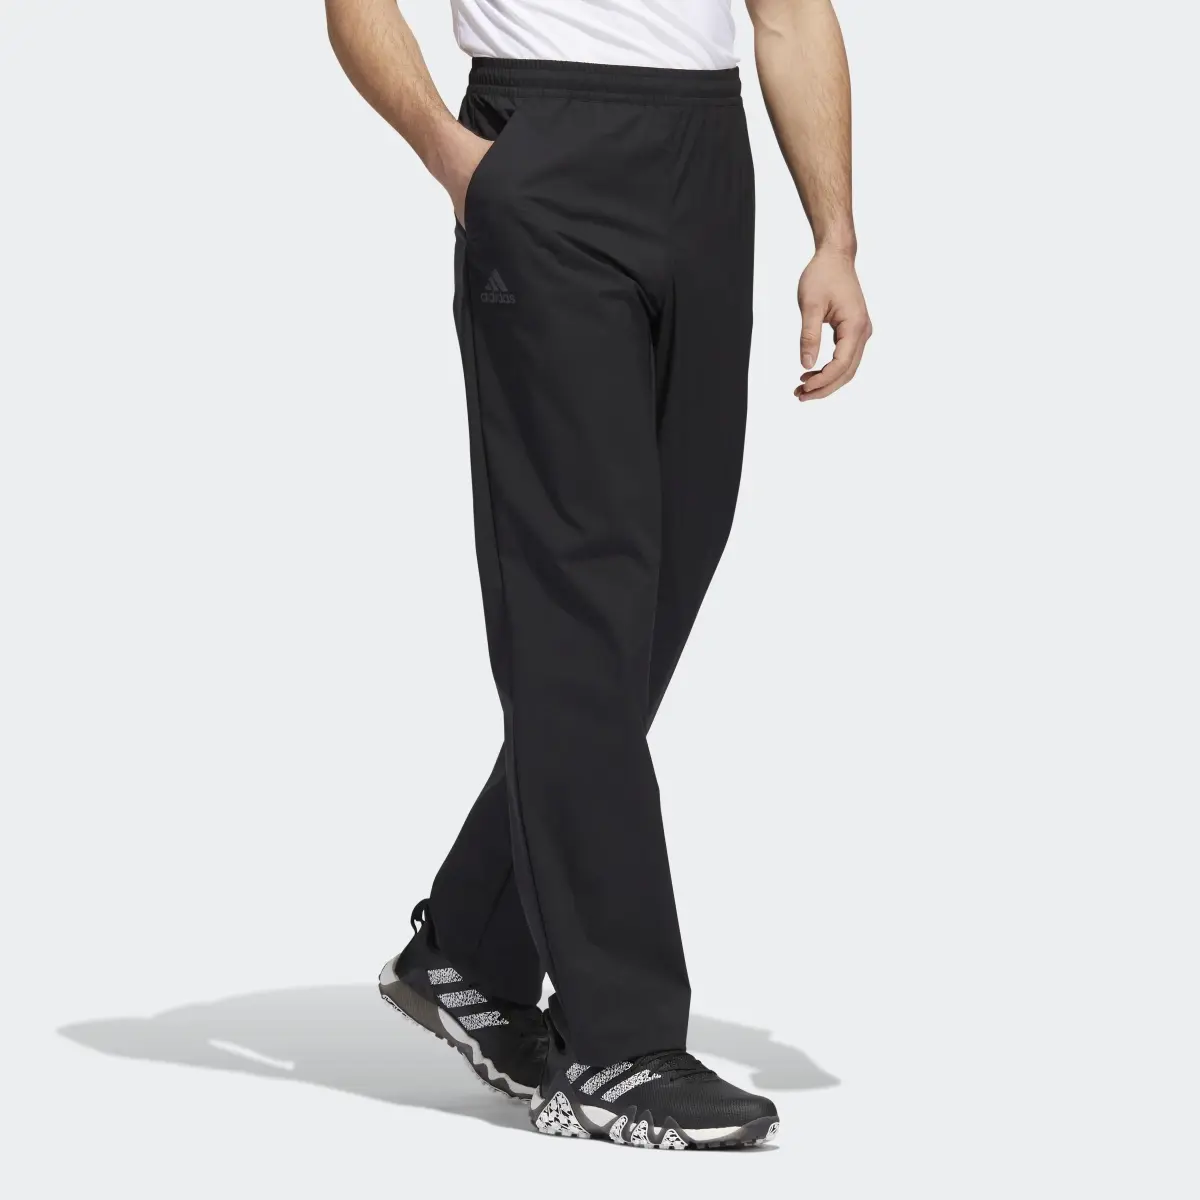 Adidas Provisional Golf Tracksuit Bottoms. 3